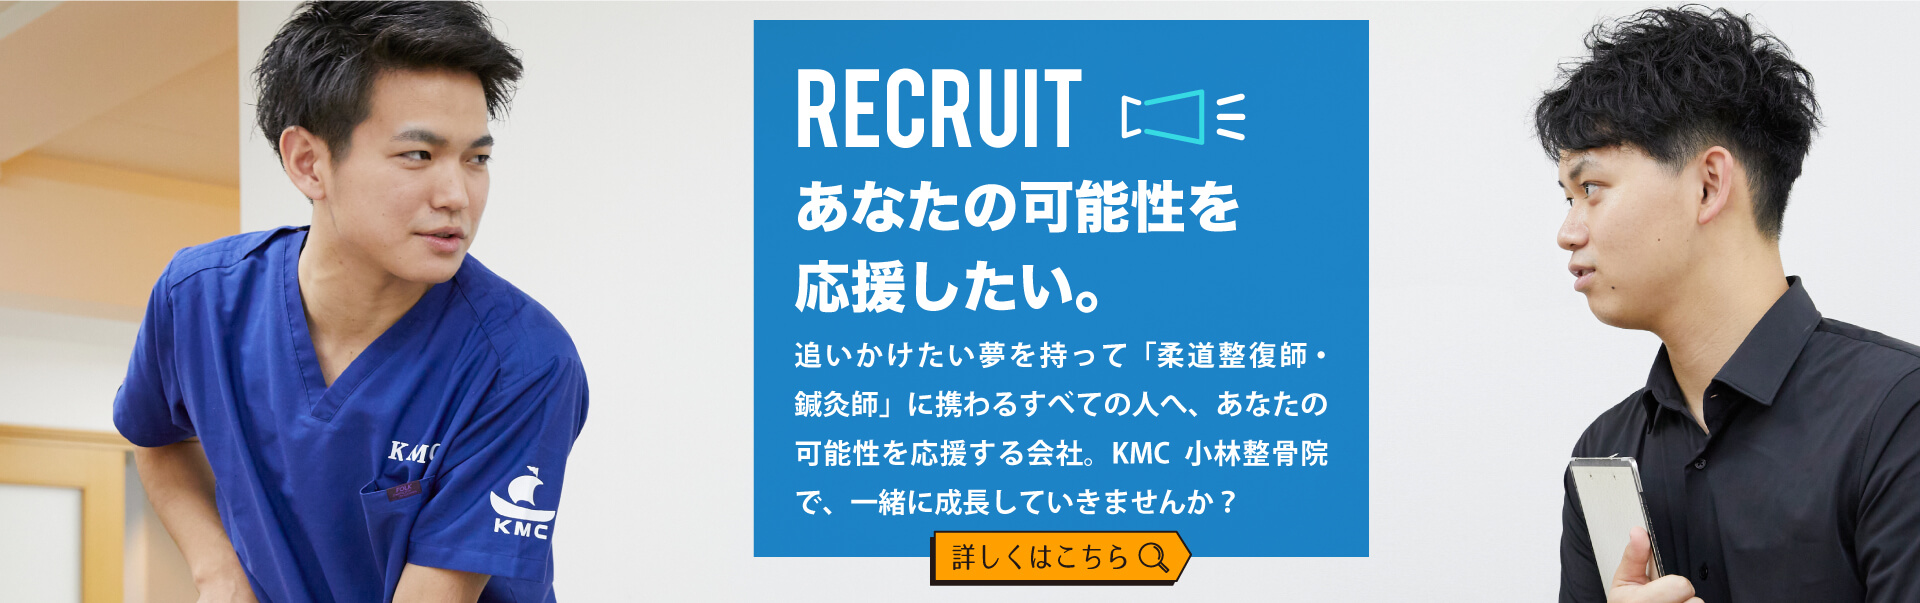 KMCのRECRUITING 採用情報